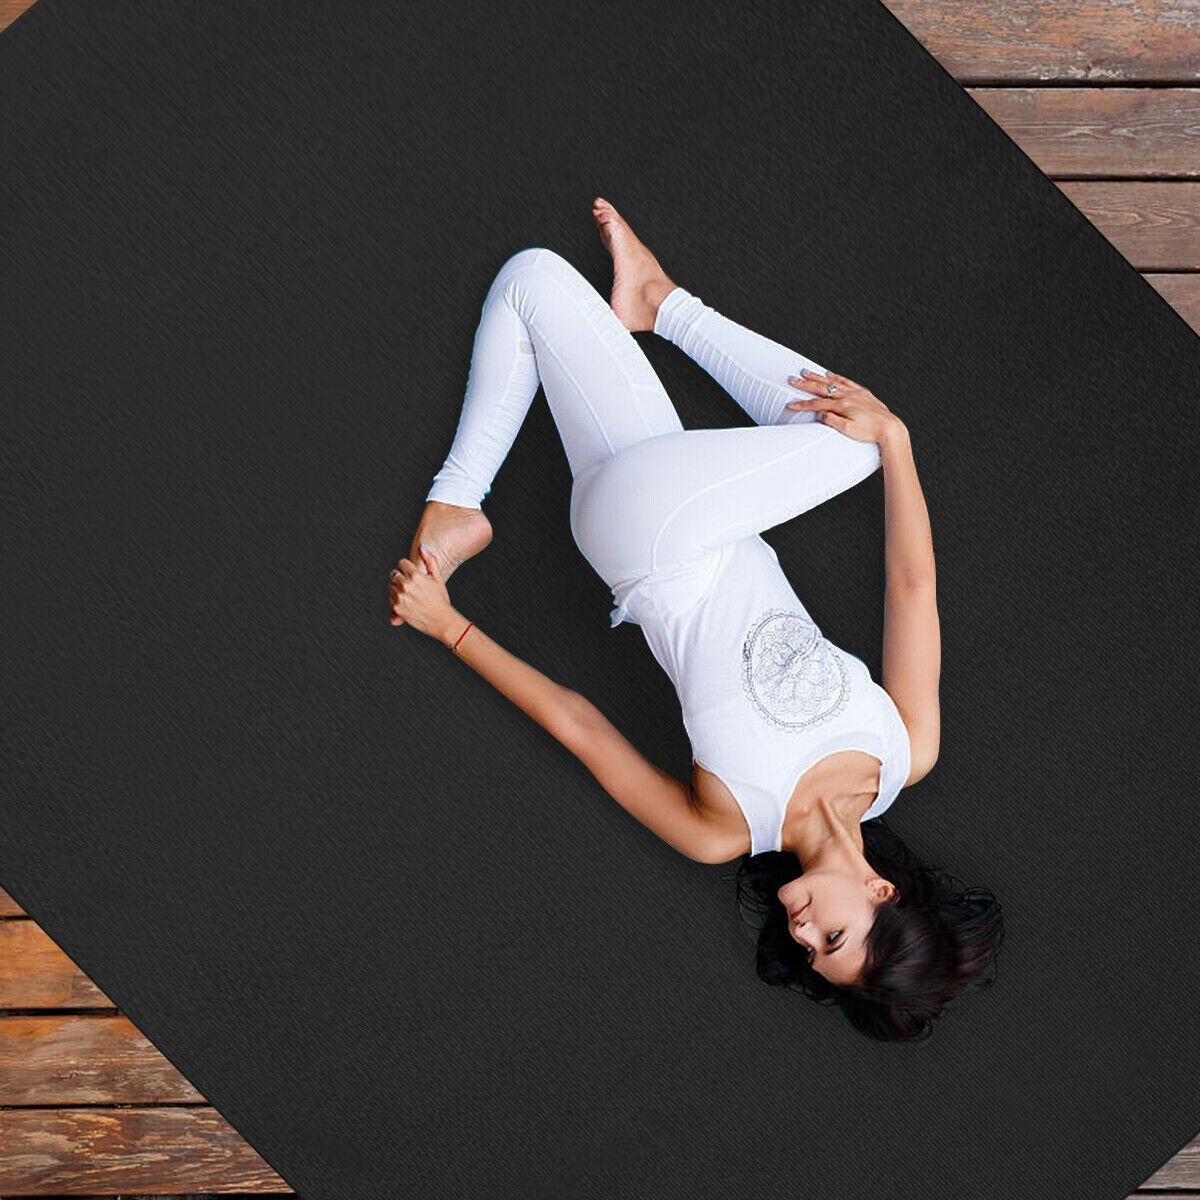 Workout Yoga Mat for Exercise, Black at Gallery Canada